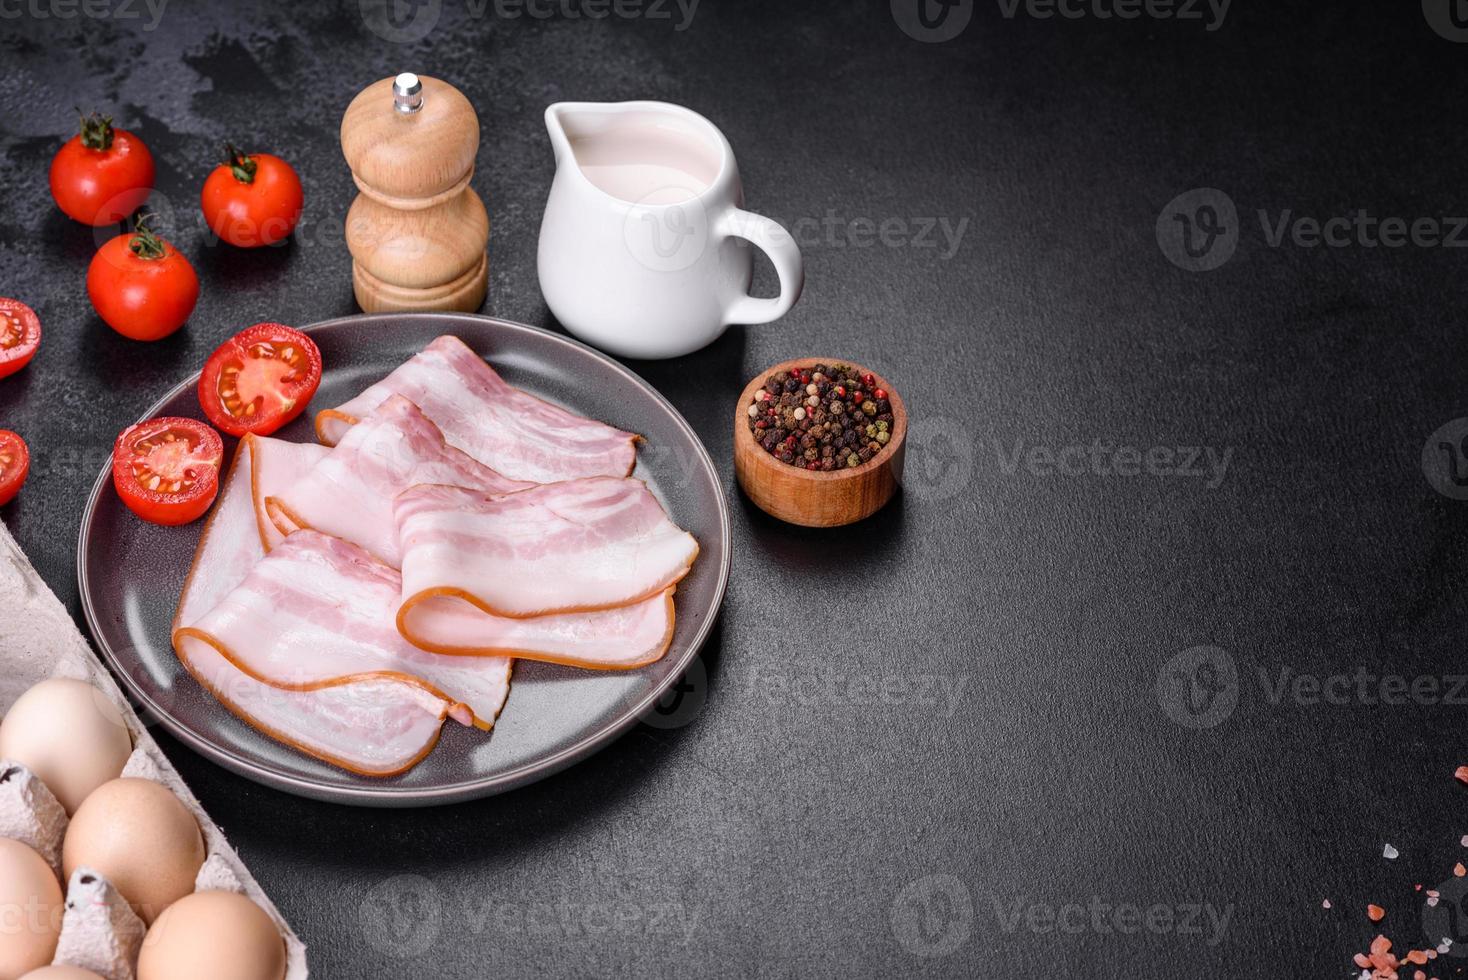 Delicious fresh raw bacon cut with slices on a grey plate against a dark concrete background photo